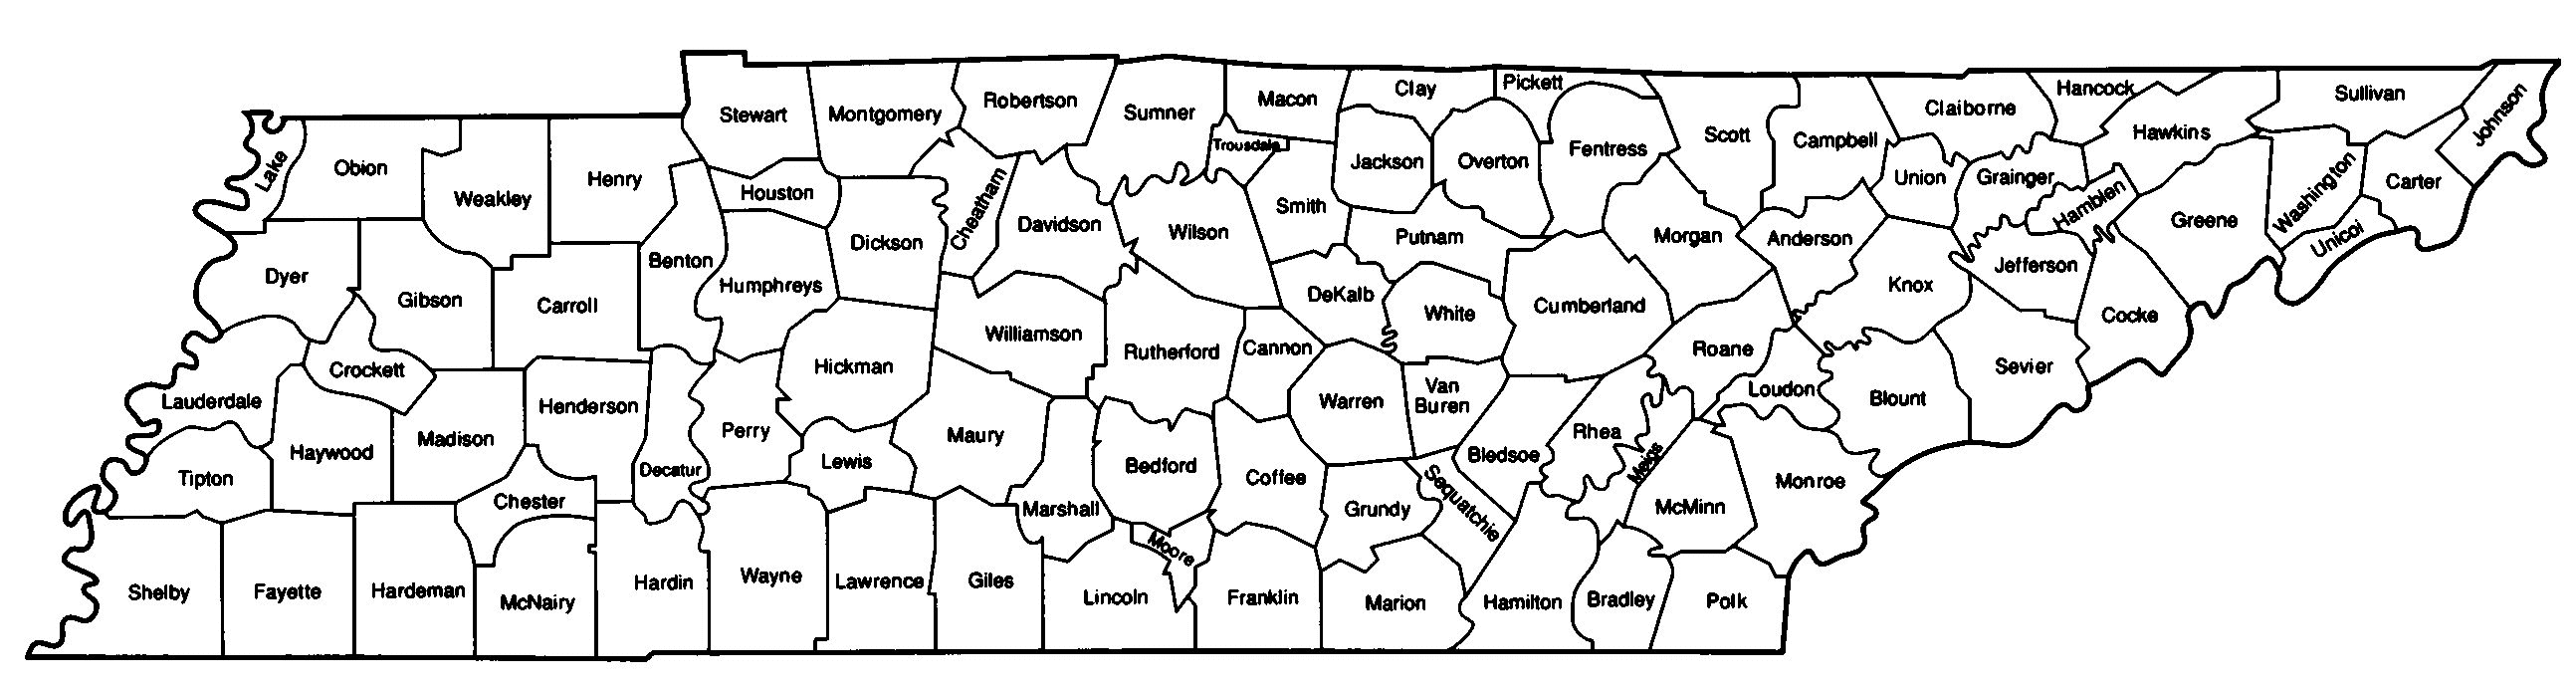 Figure 7: County Map of Tennessee